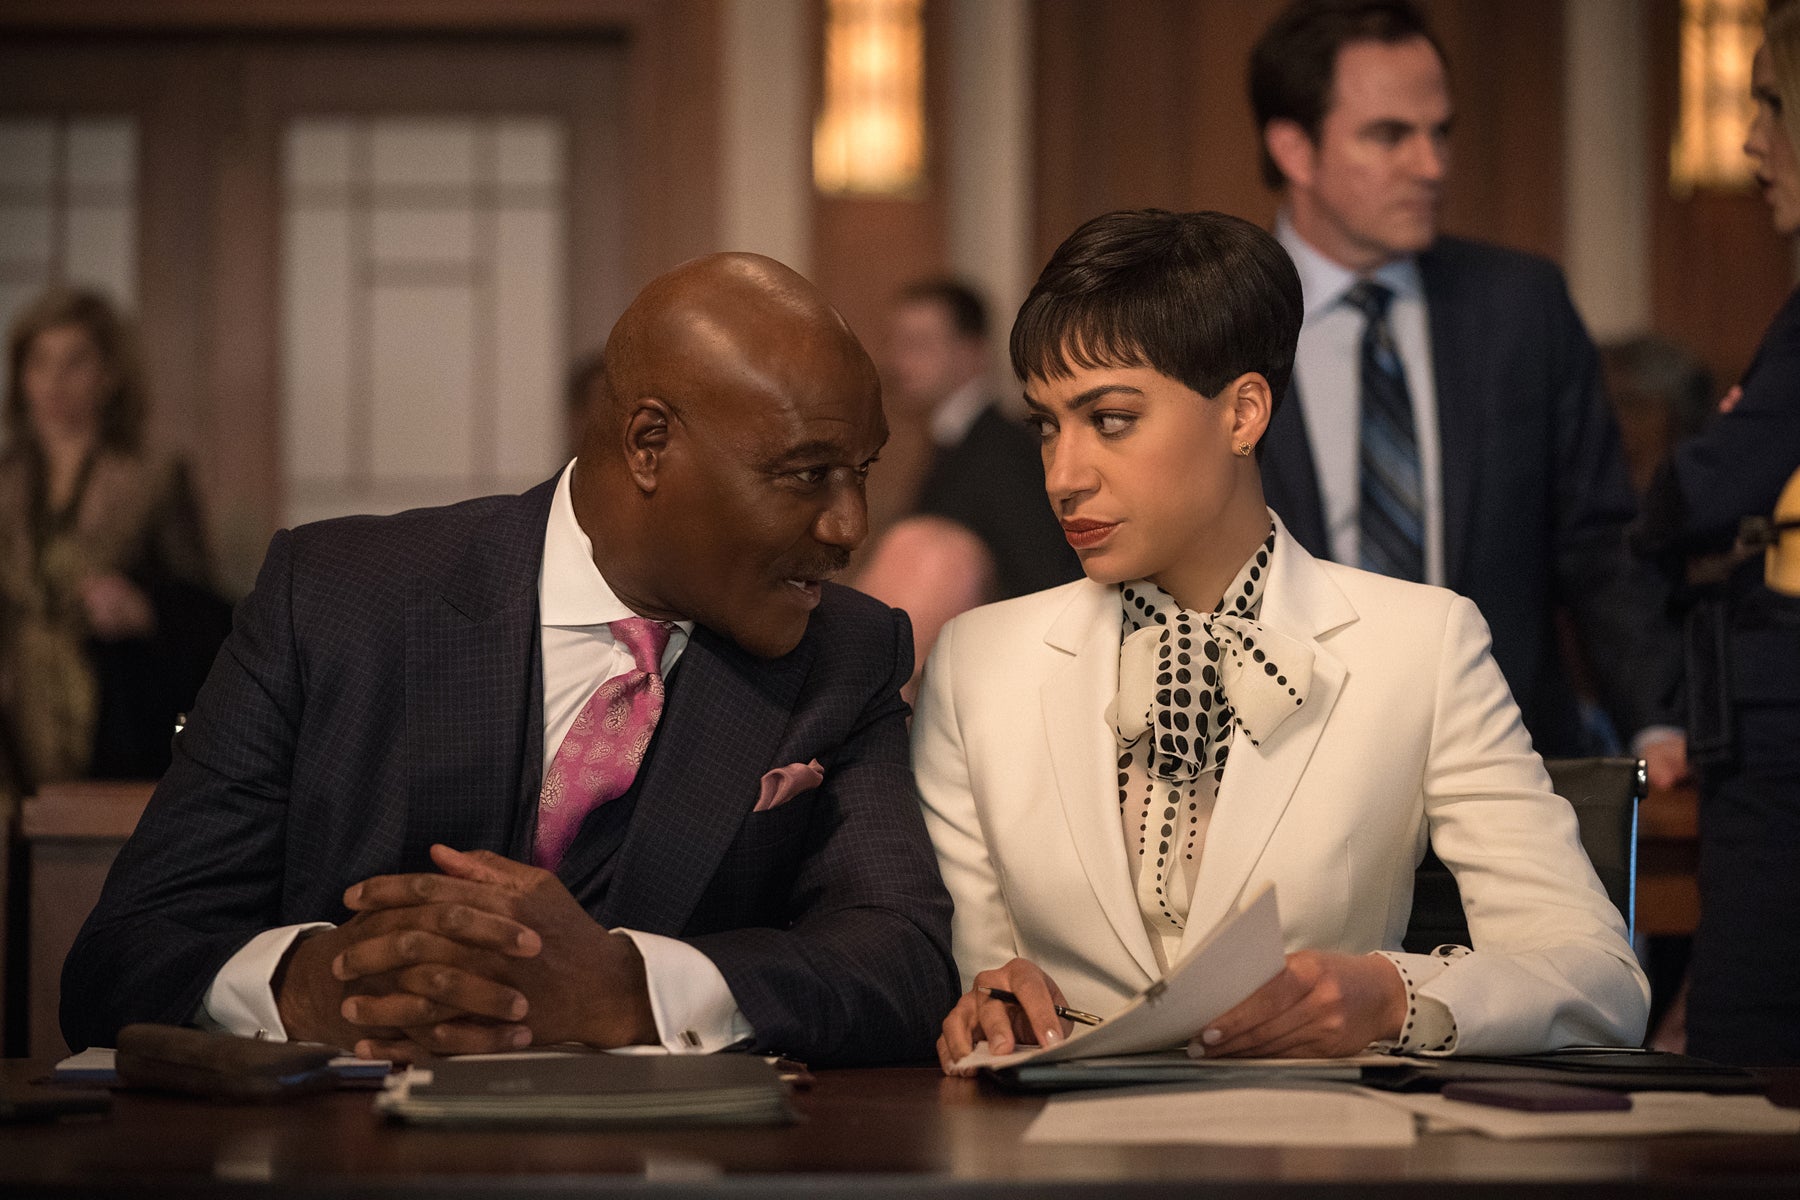 Adrian Boseman leans over to talk to Lucca Quinn in court during a trial where they are defending Chum Hum. They both look annoyed because in the episode, their clients are being difficult. 